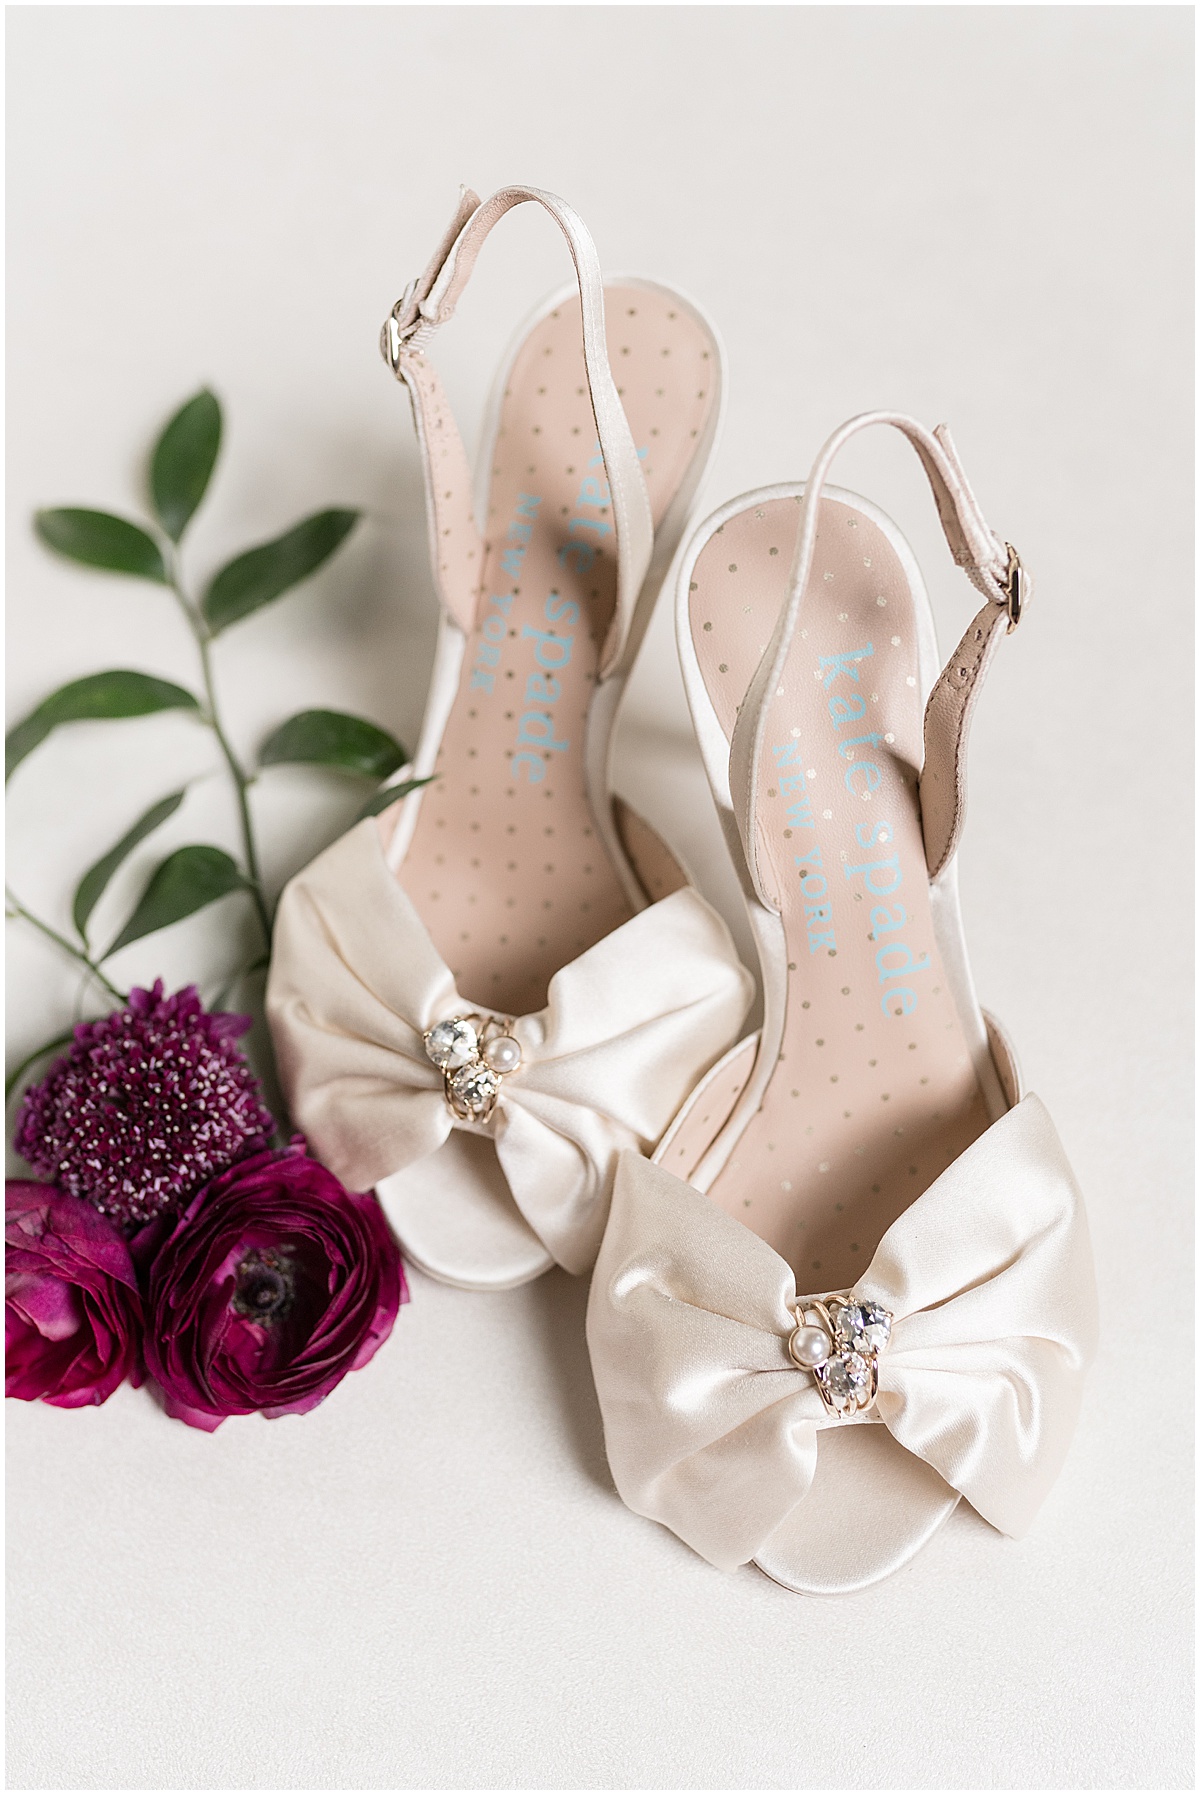 Bride's Kate Spade wedding shoes for Historic Saint Joseph Hall wedding in Indianapolis